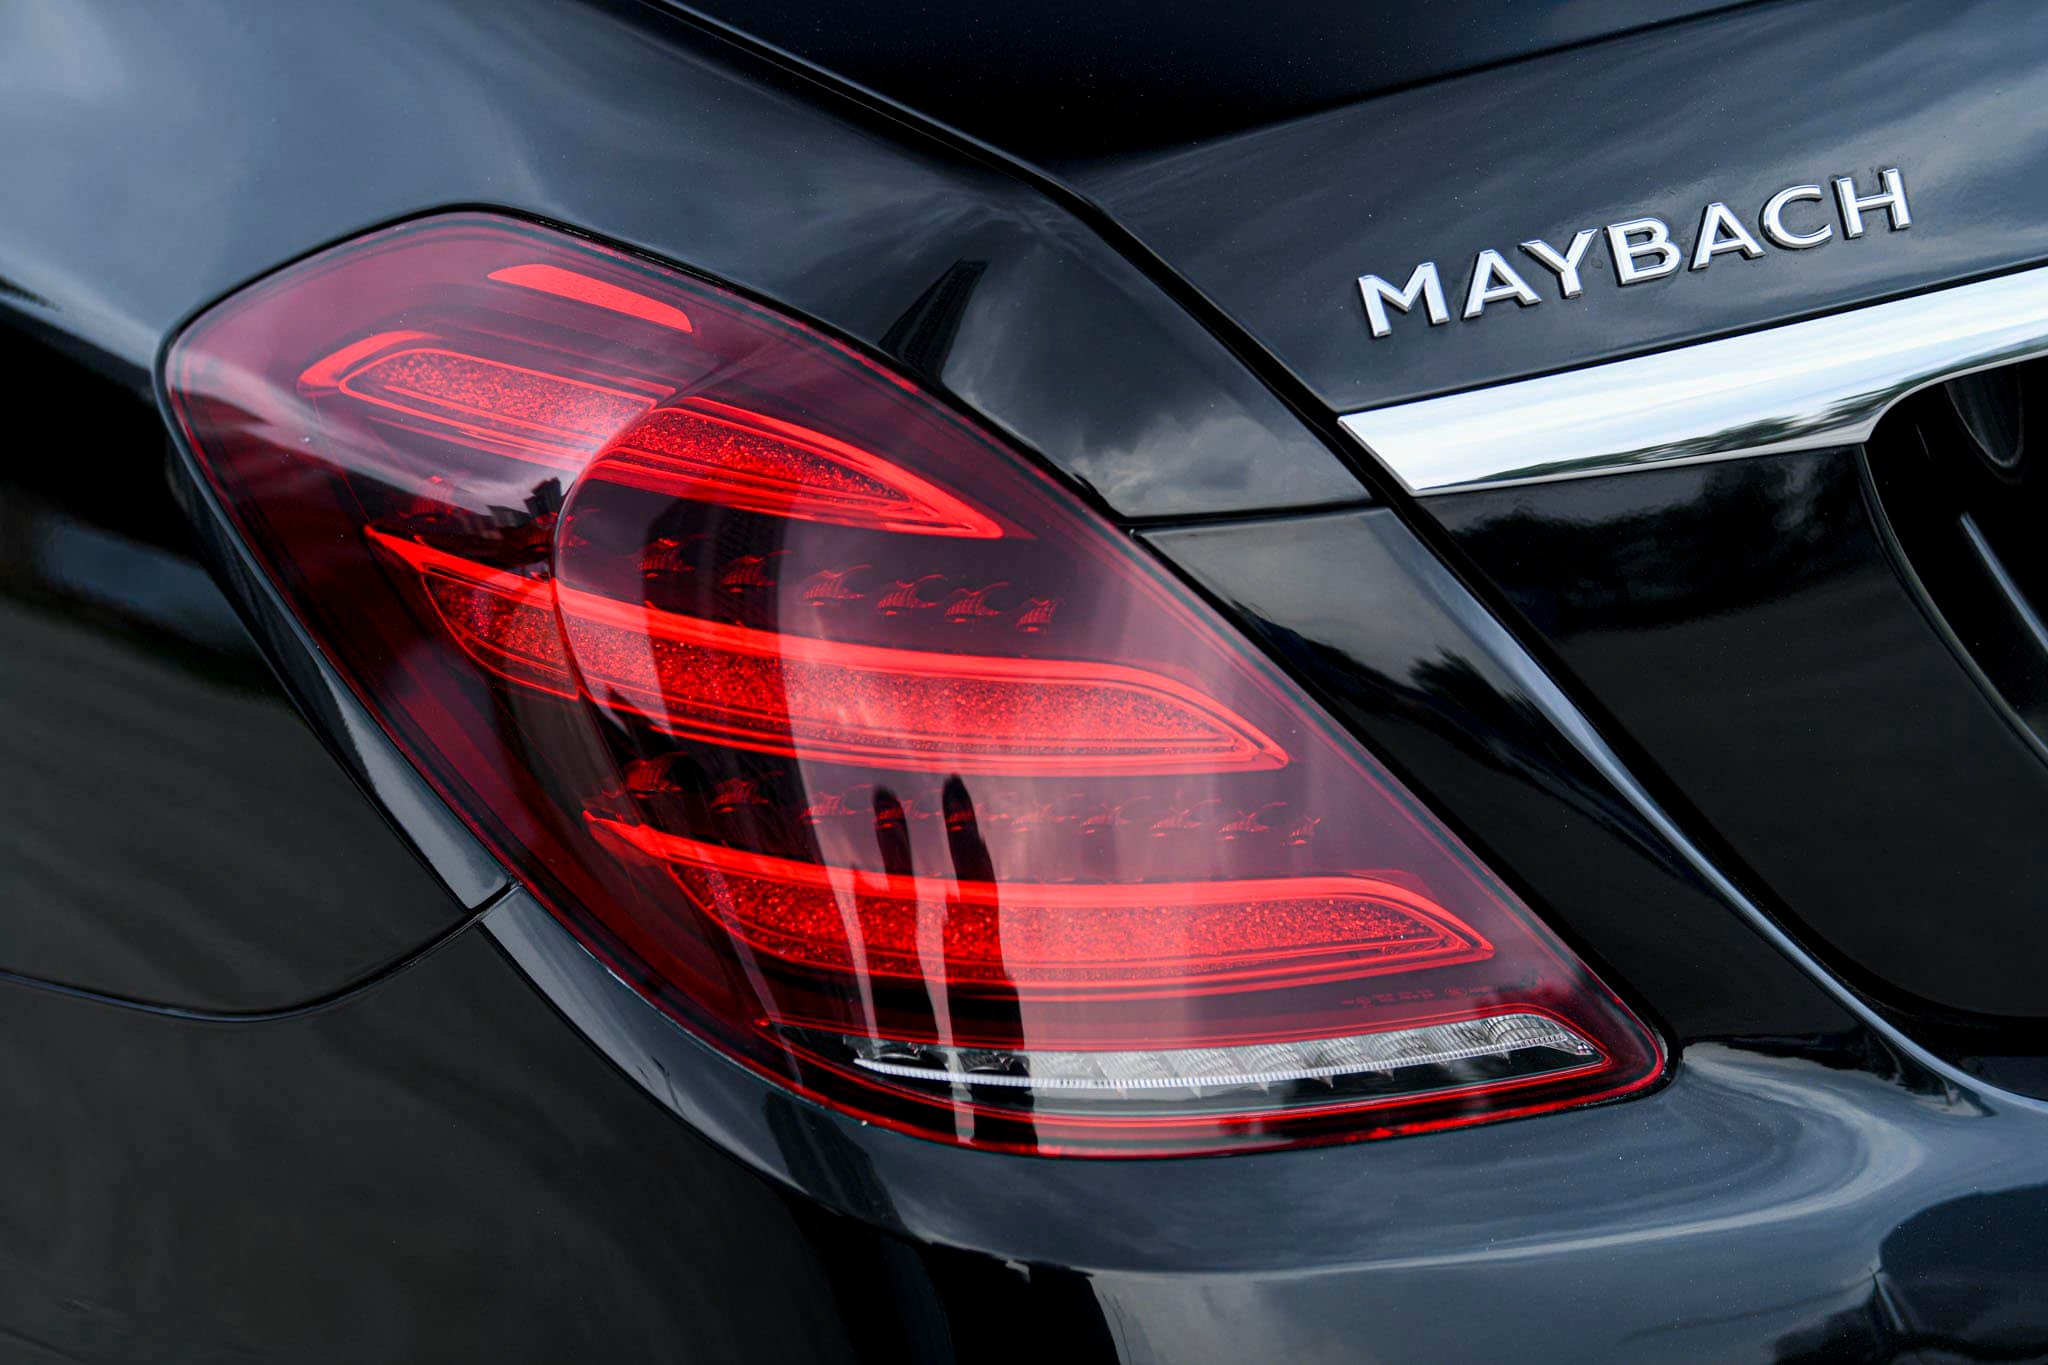 Mercedes Maybach S450 full